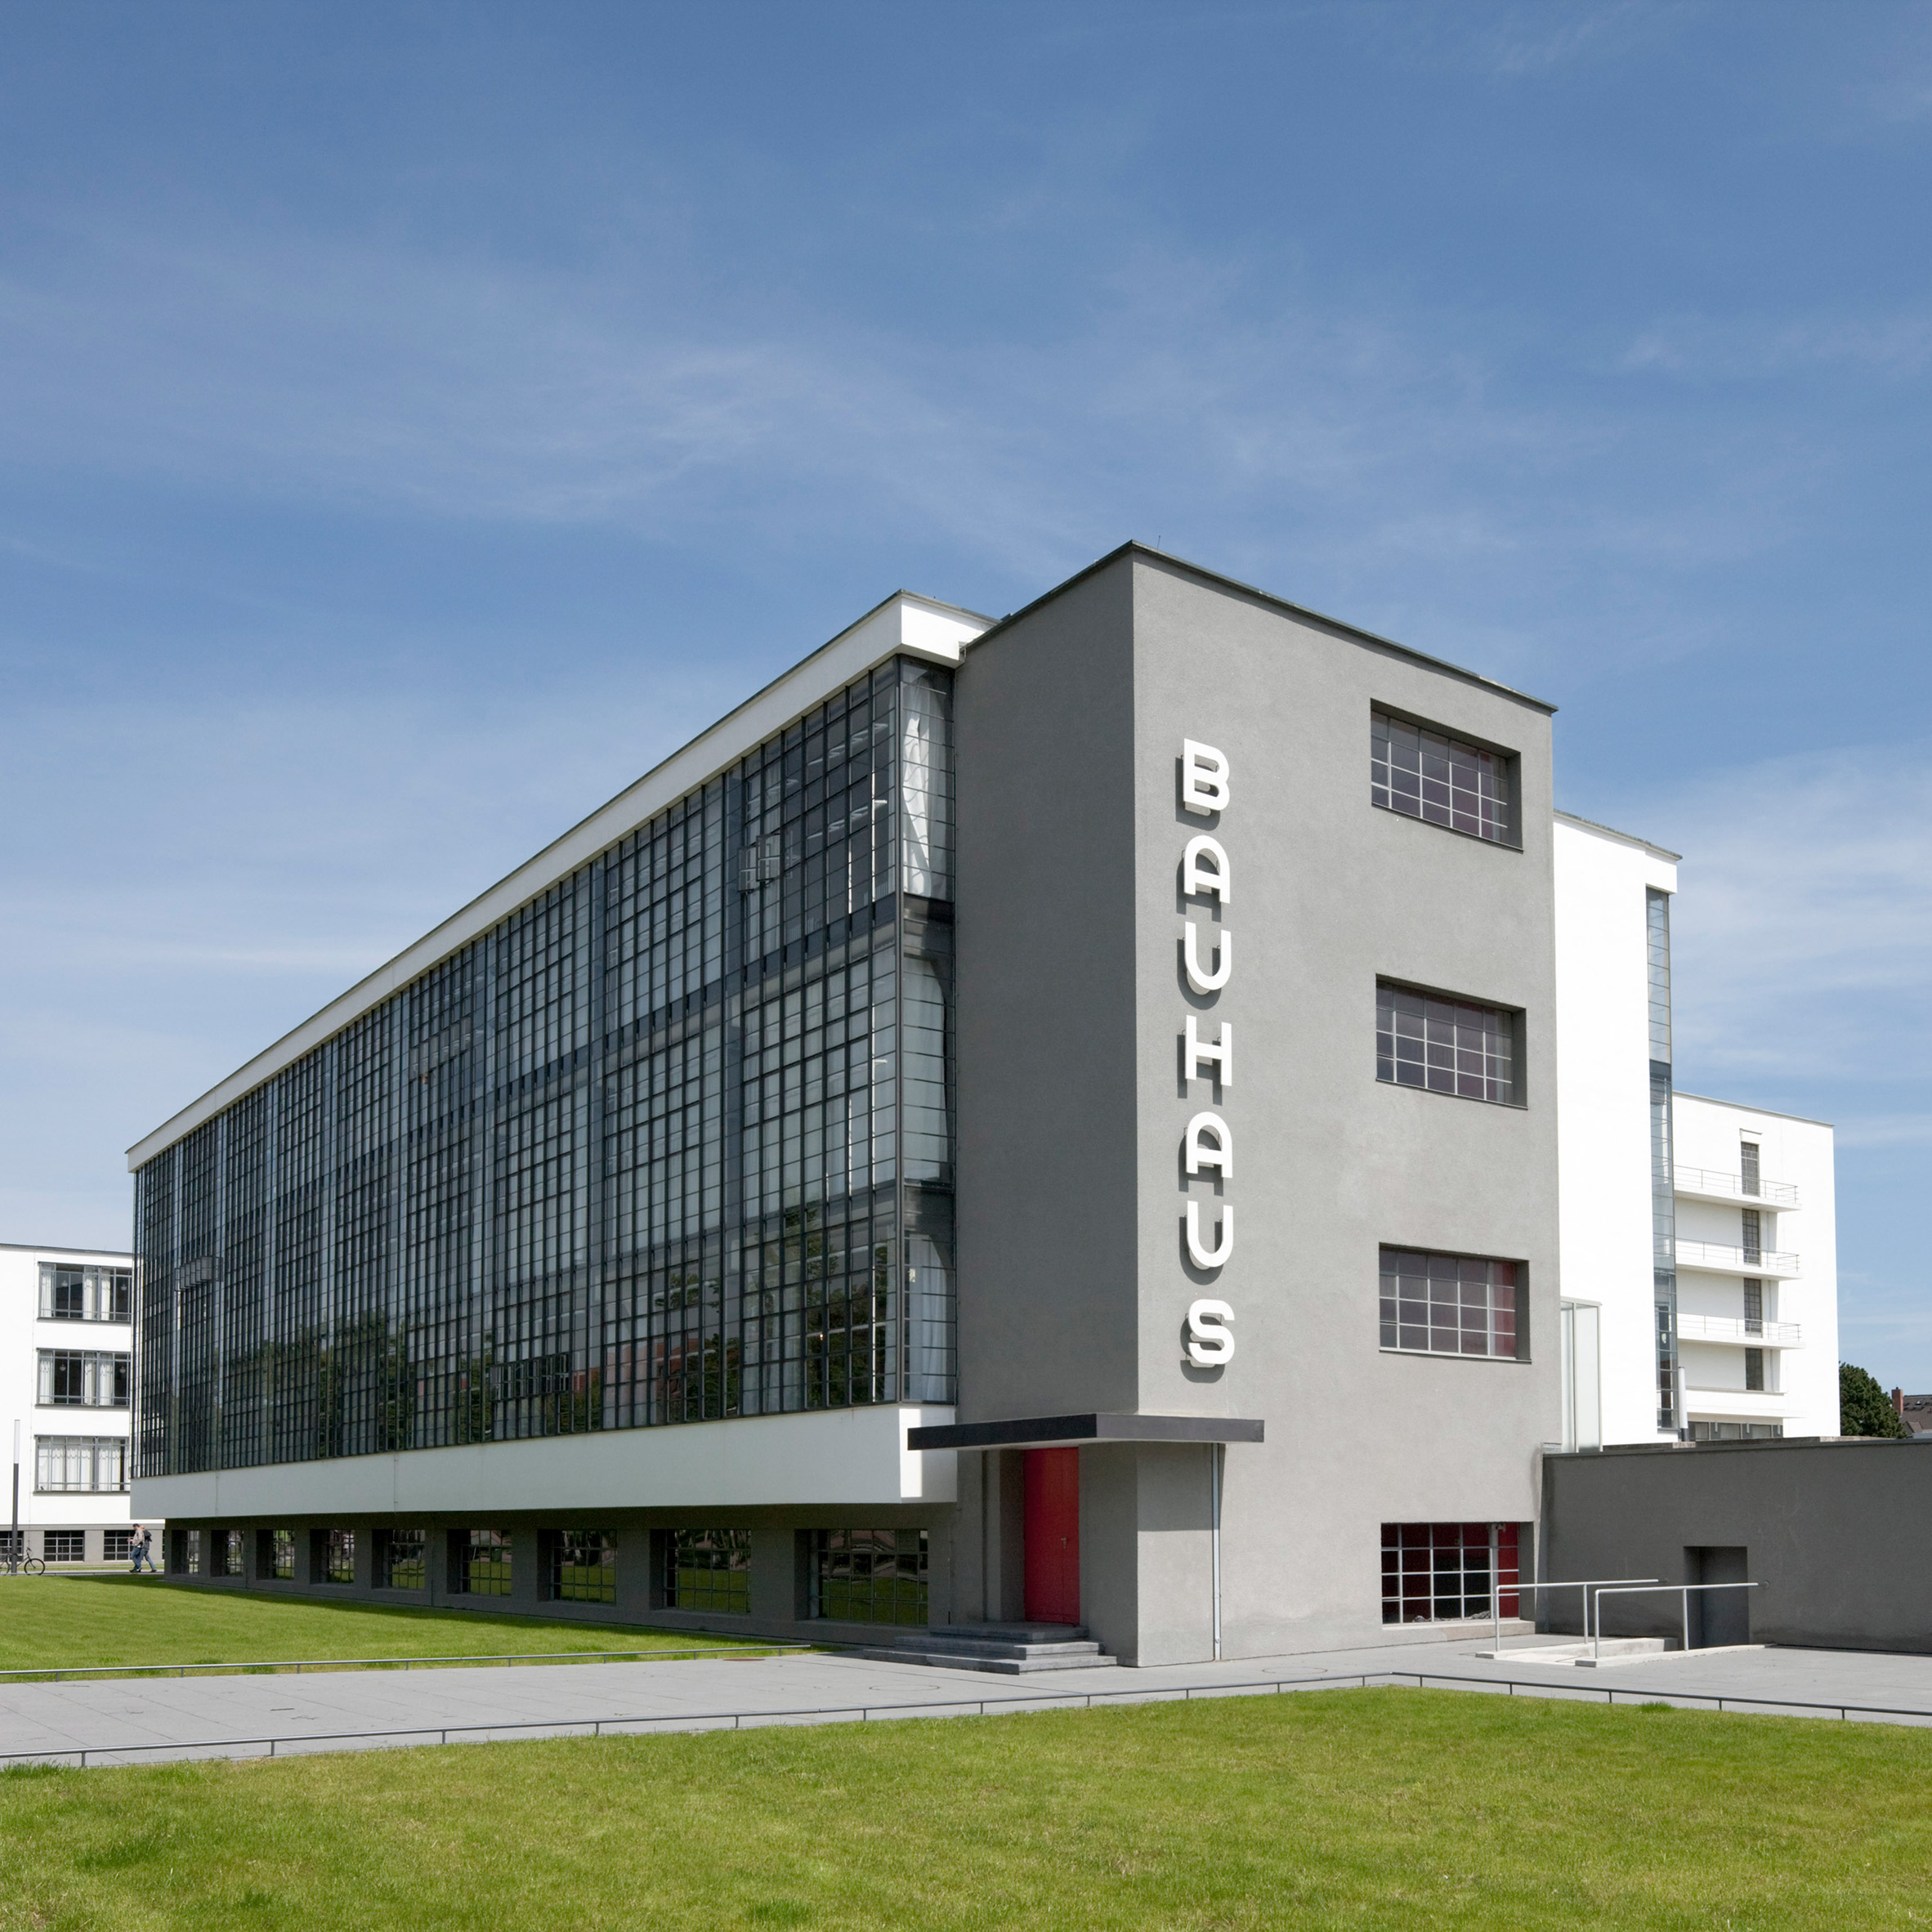 Bauhaus Architecture And Design From A To Z Free Download Architectural Cad Drawings